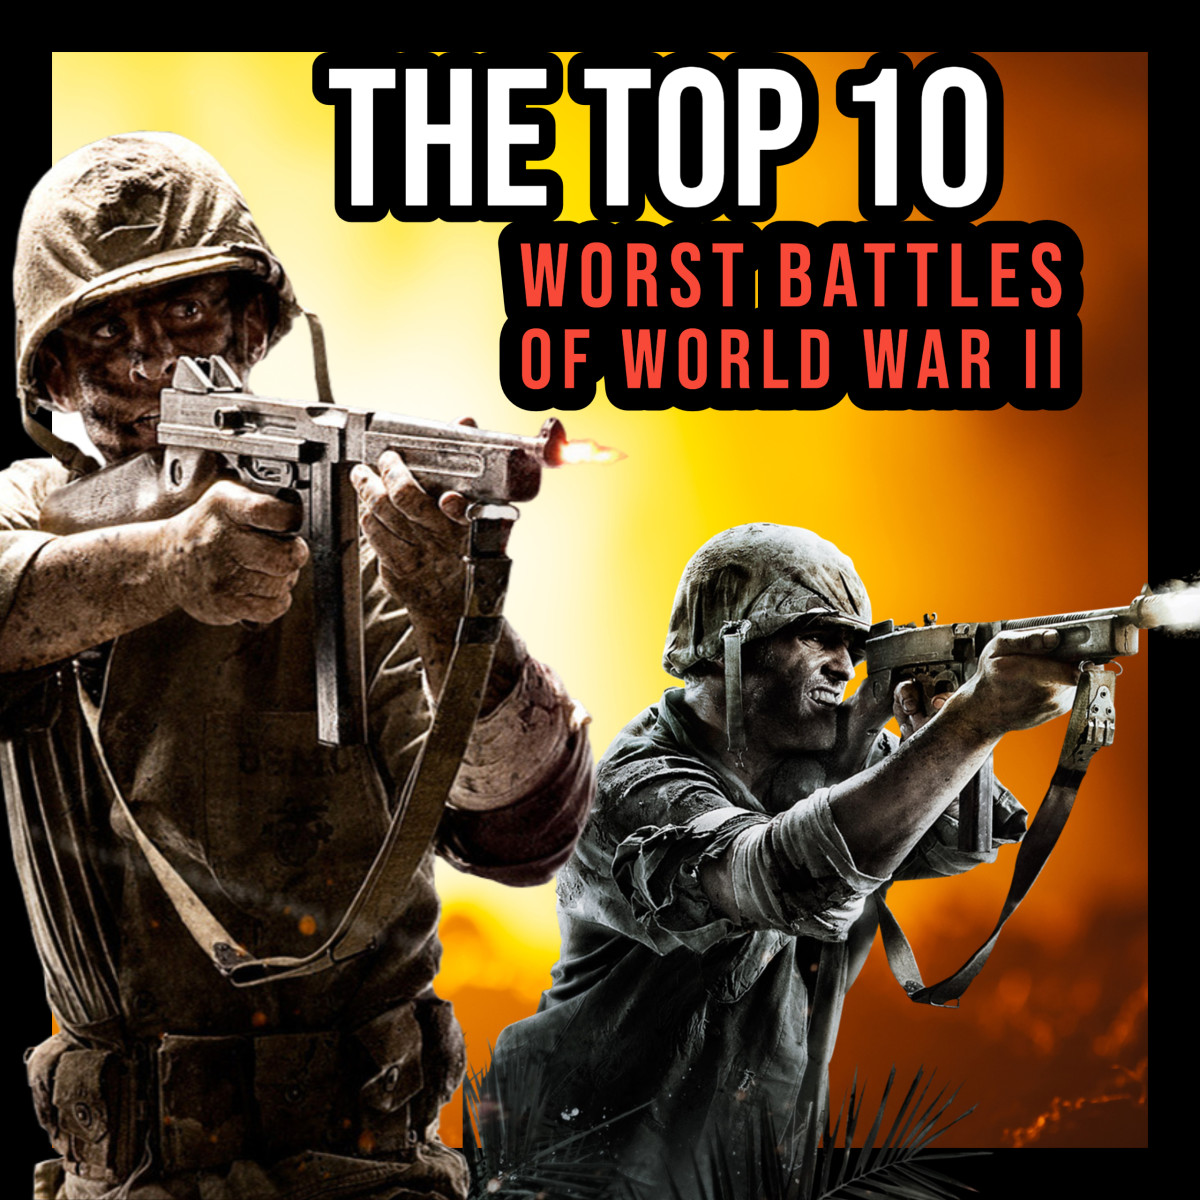 From Monte Cassino to Stalingrad, this article examines and ranks the 10 worst battles of the Second World War.